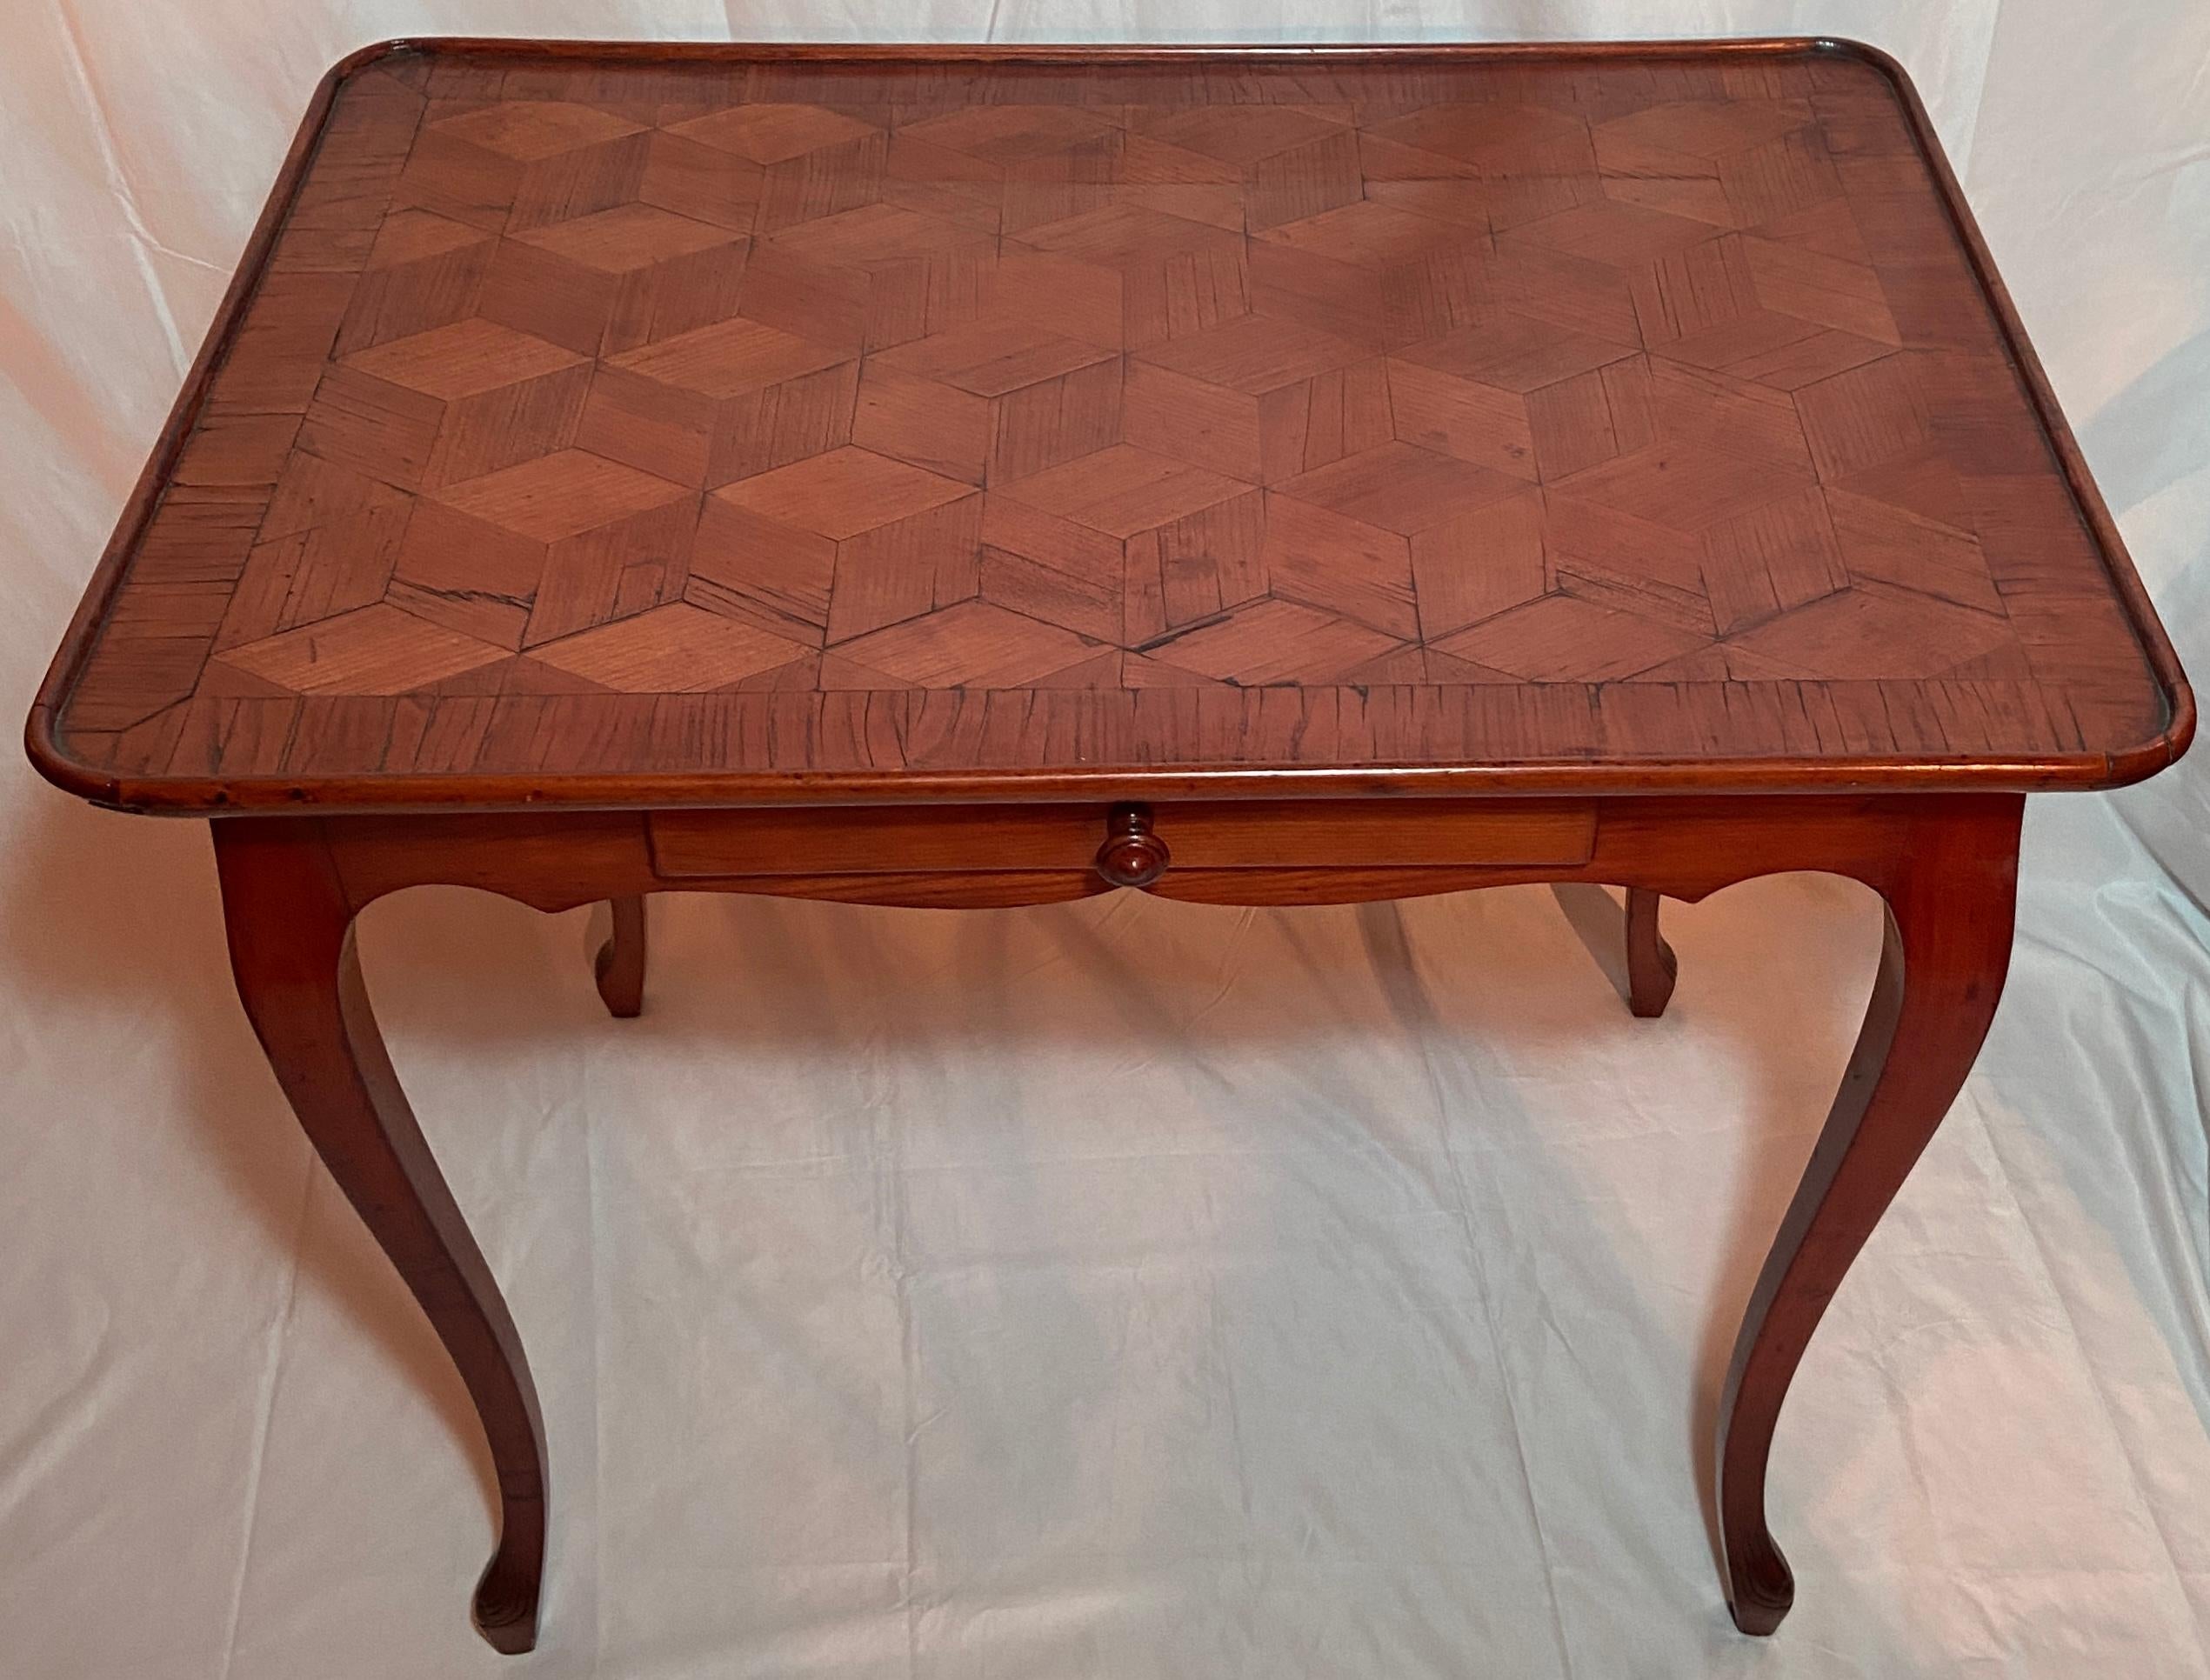 Antique early 19th century french parquetry walnut table.